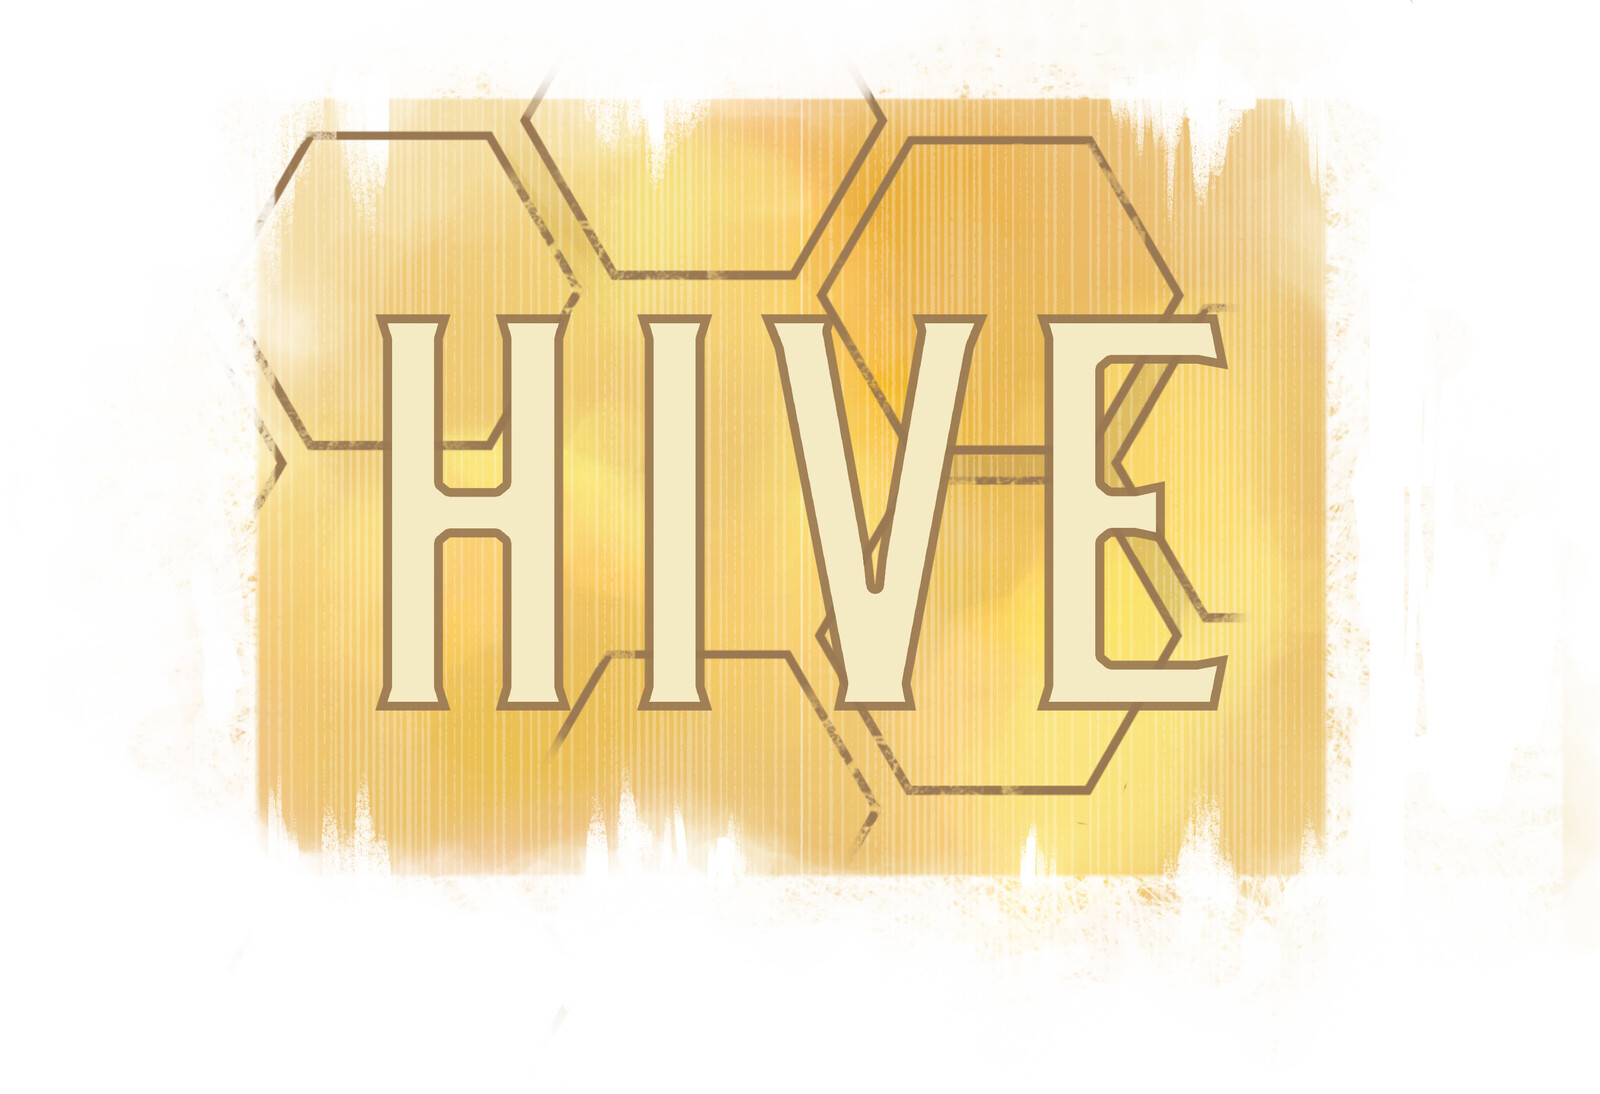 Hive - a gang with a heavy focus on cybernetic augmentations.